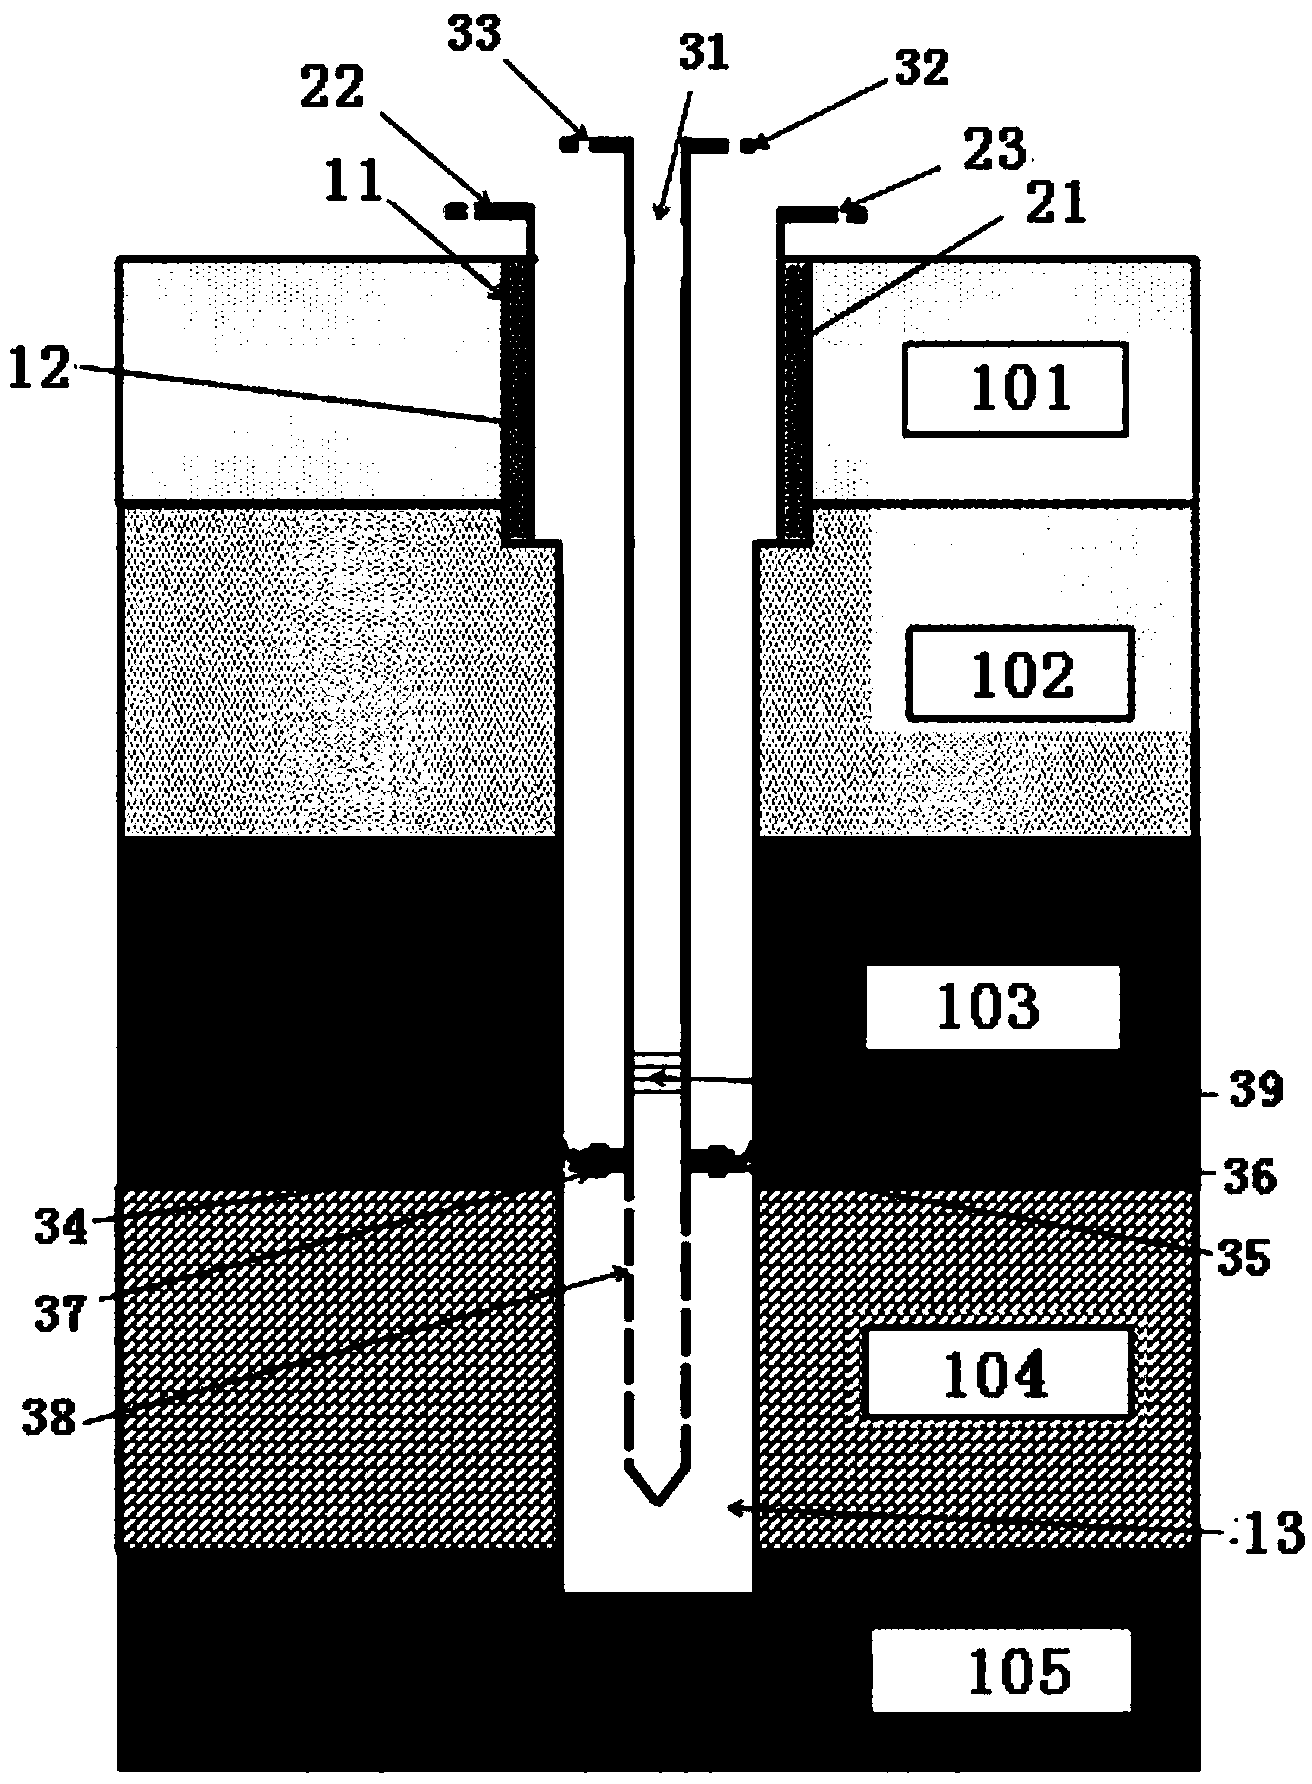 High-pressure grouting process of water-rich weathering fracture rock formation below thick unconsolidated formation for coal mine